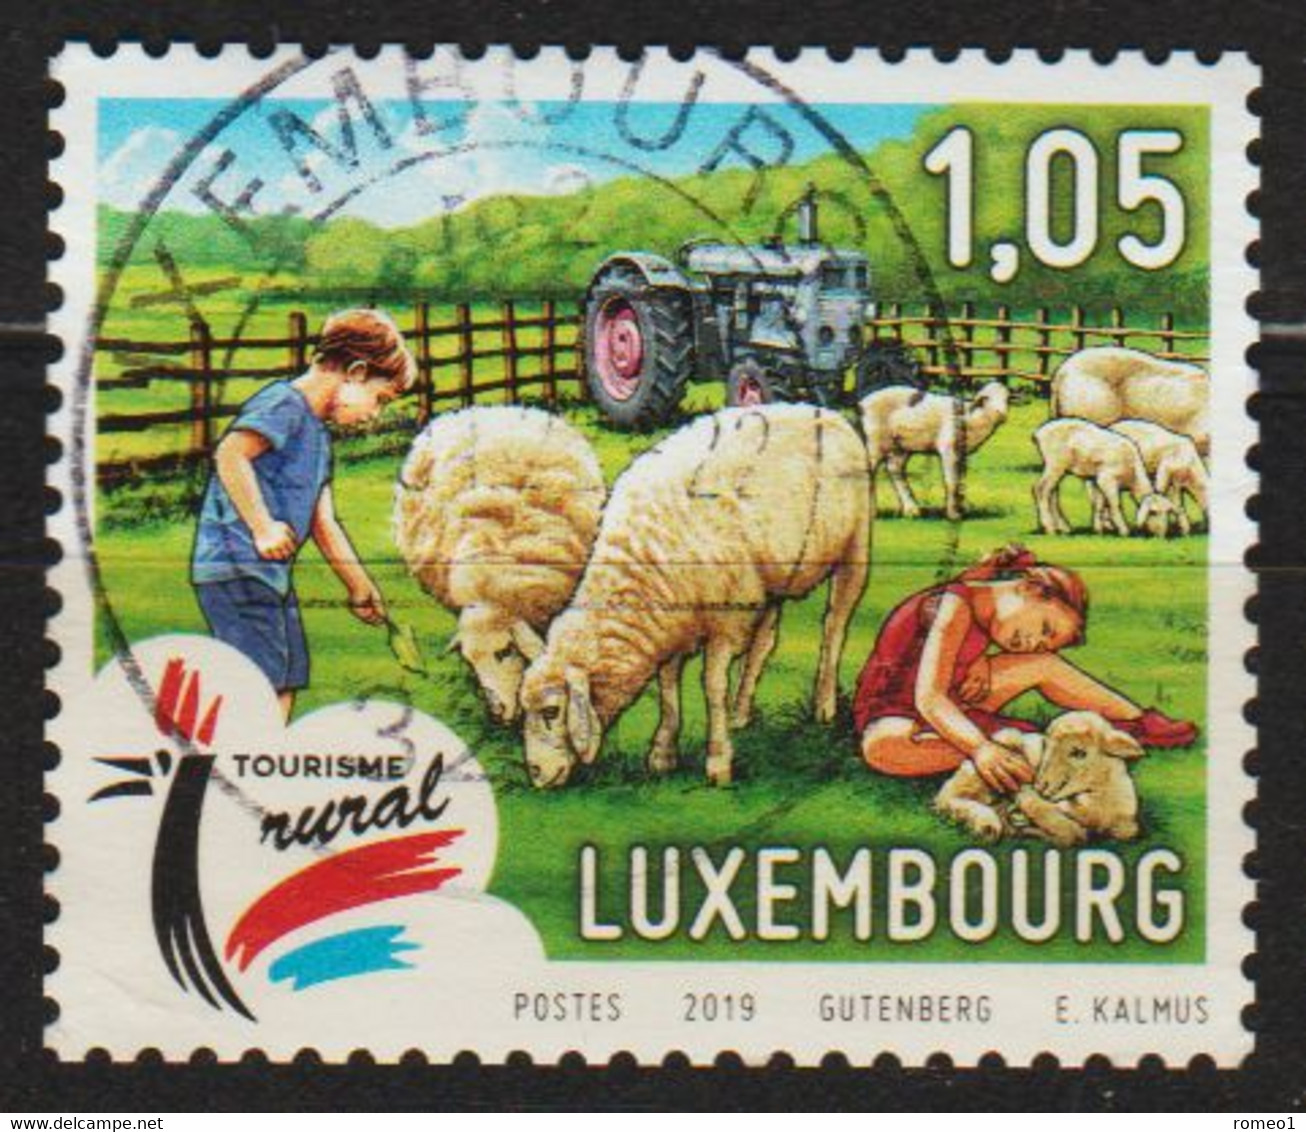 2019: Luxemburg Mi.Nr. 2204 Gest. / Luxembourg Y&T No. 2148 Obl. (d448) - Used Stamps